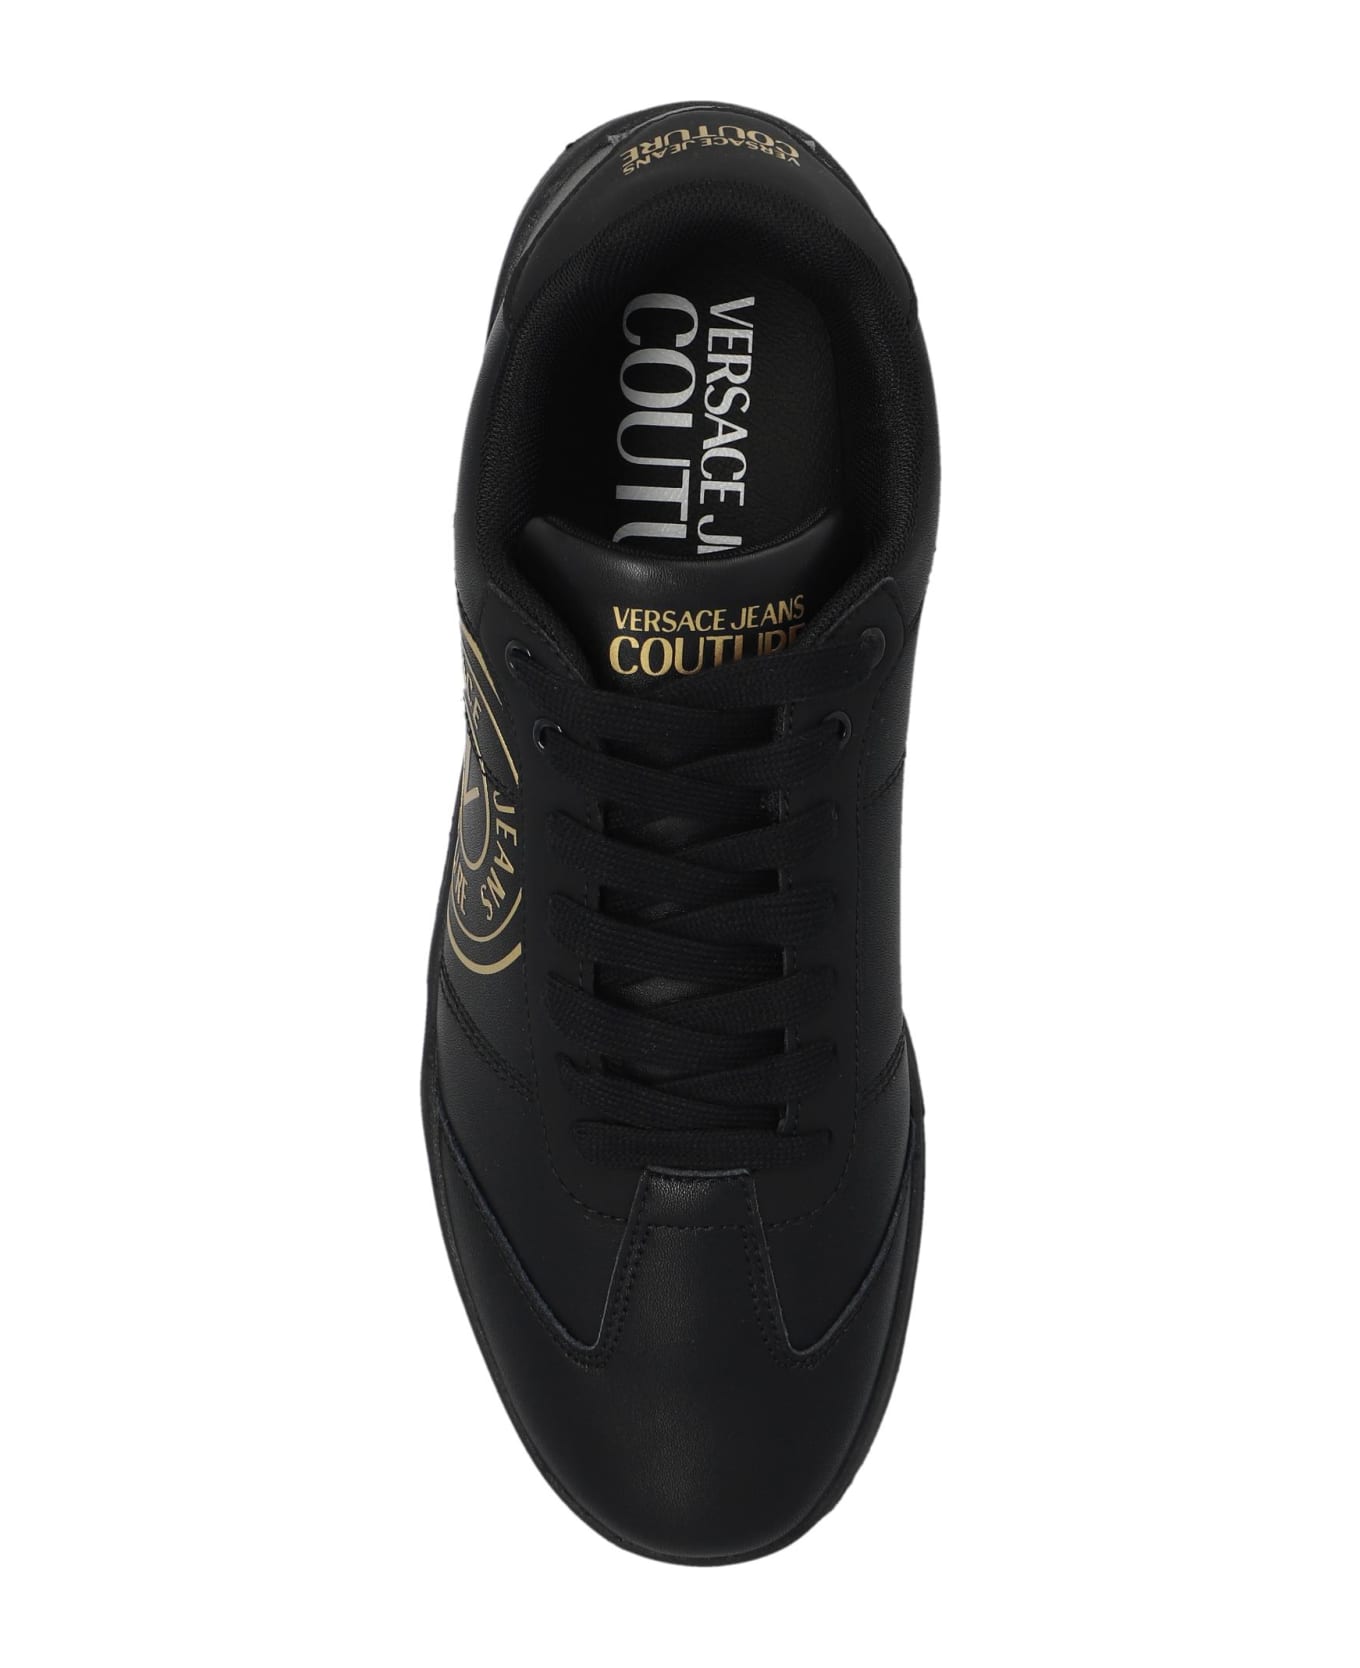 Versace Jeans Couture Fondo Brooklyn Dis. Shoes - BLACK/GOLD